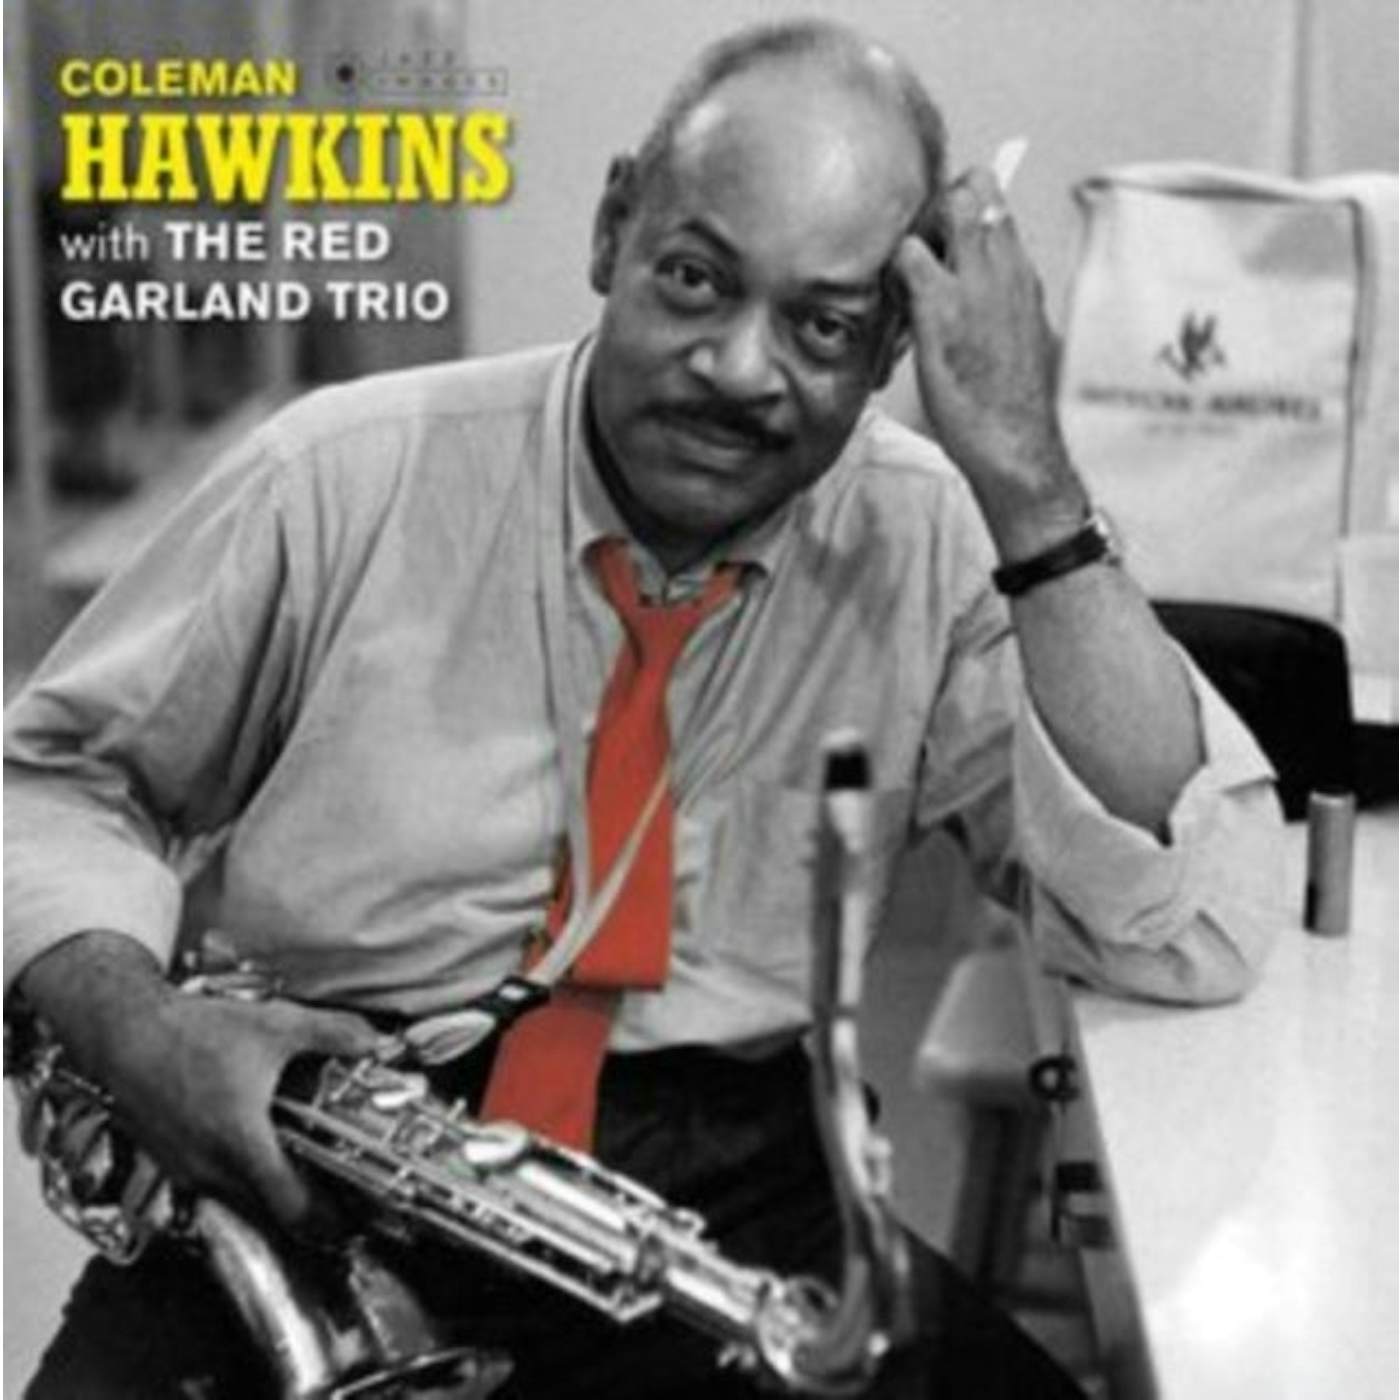 Coleman Hawkins LP Vinyl Record - Coleman Hawkins With The Red Garland Trio (Deluxe Edition)